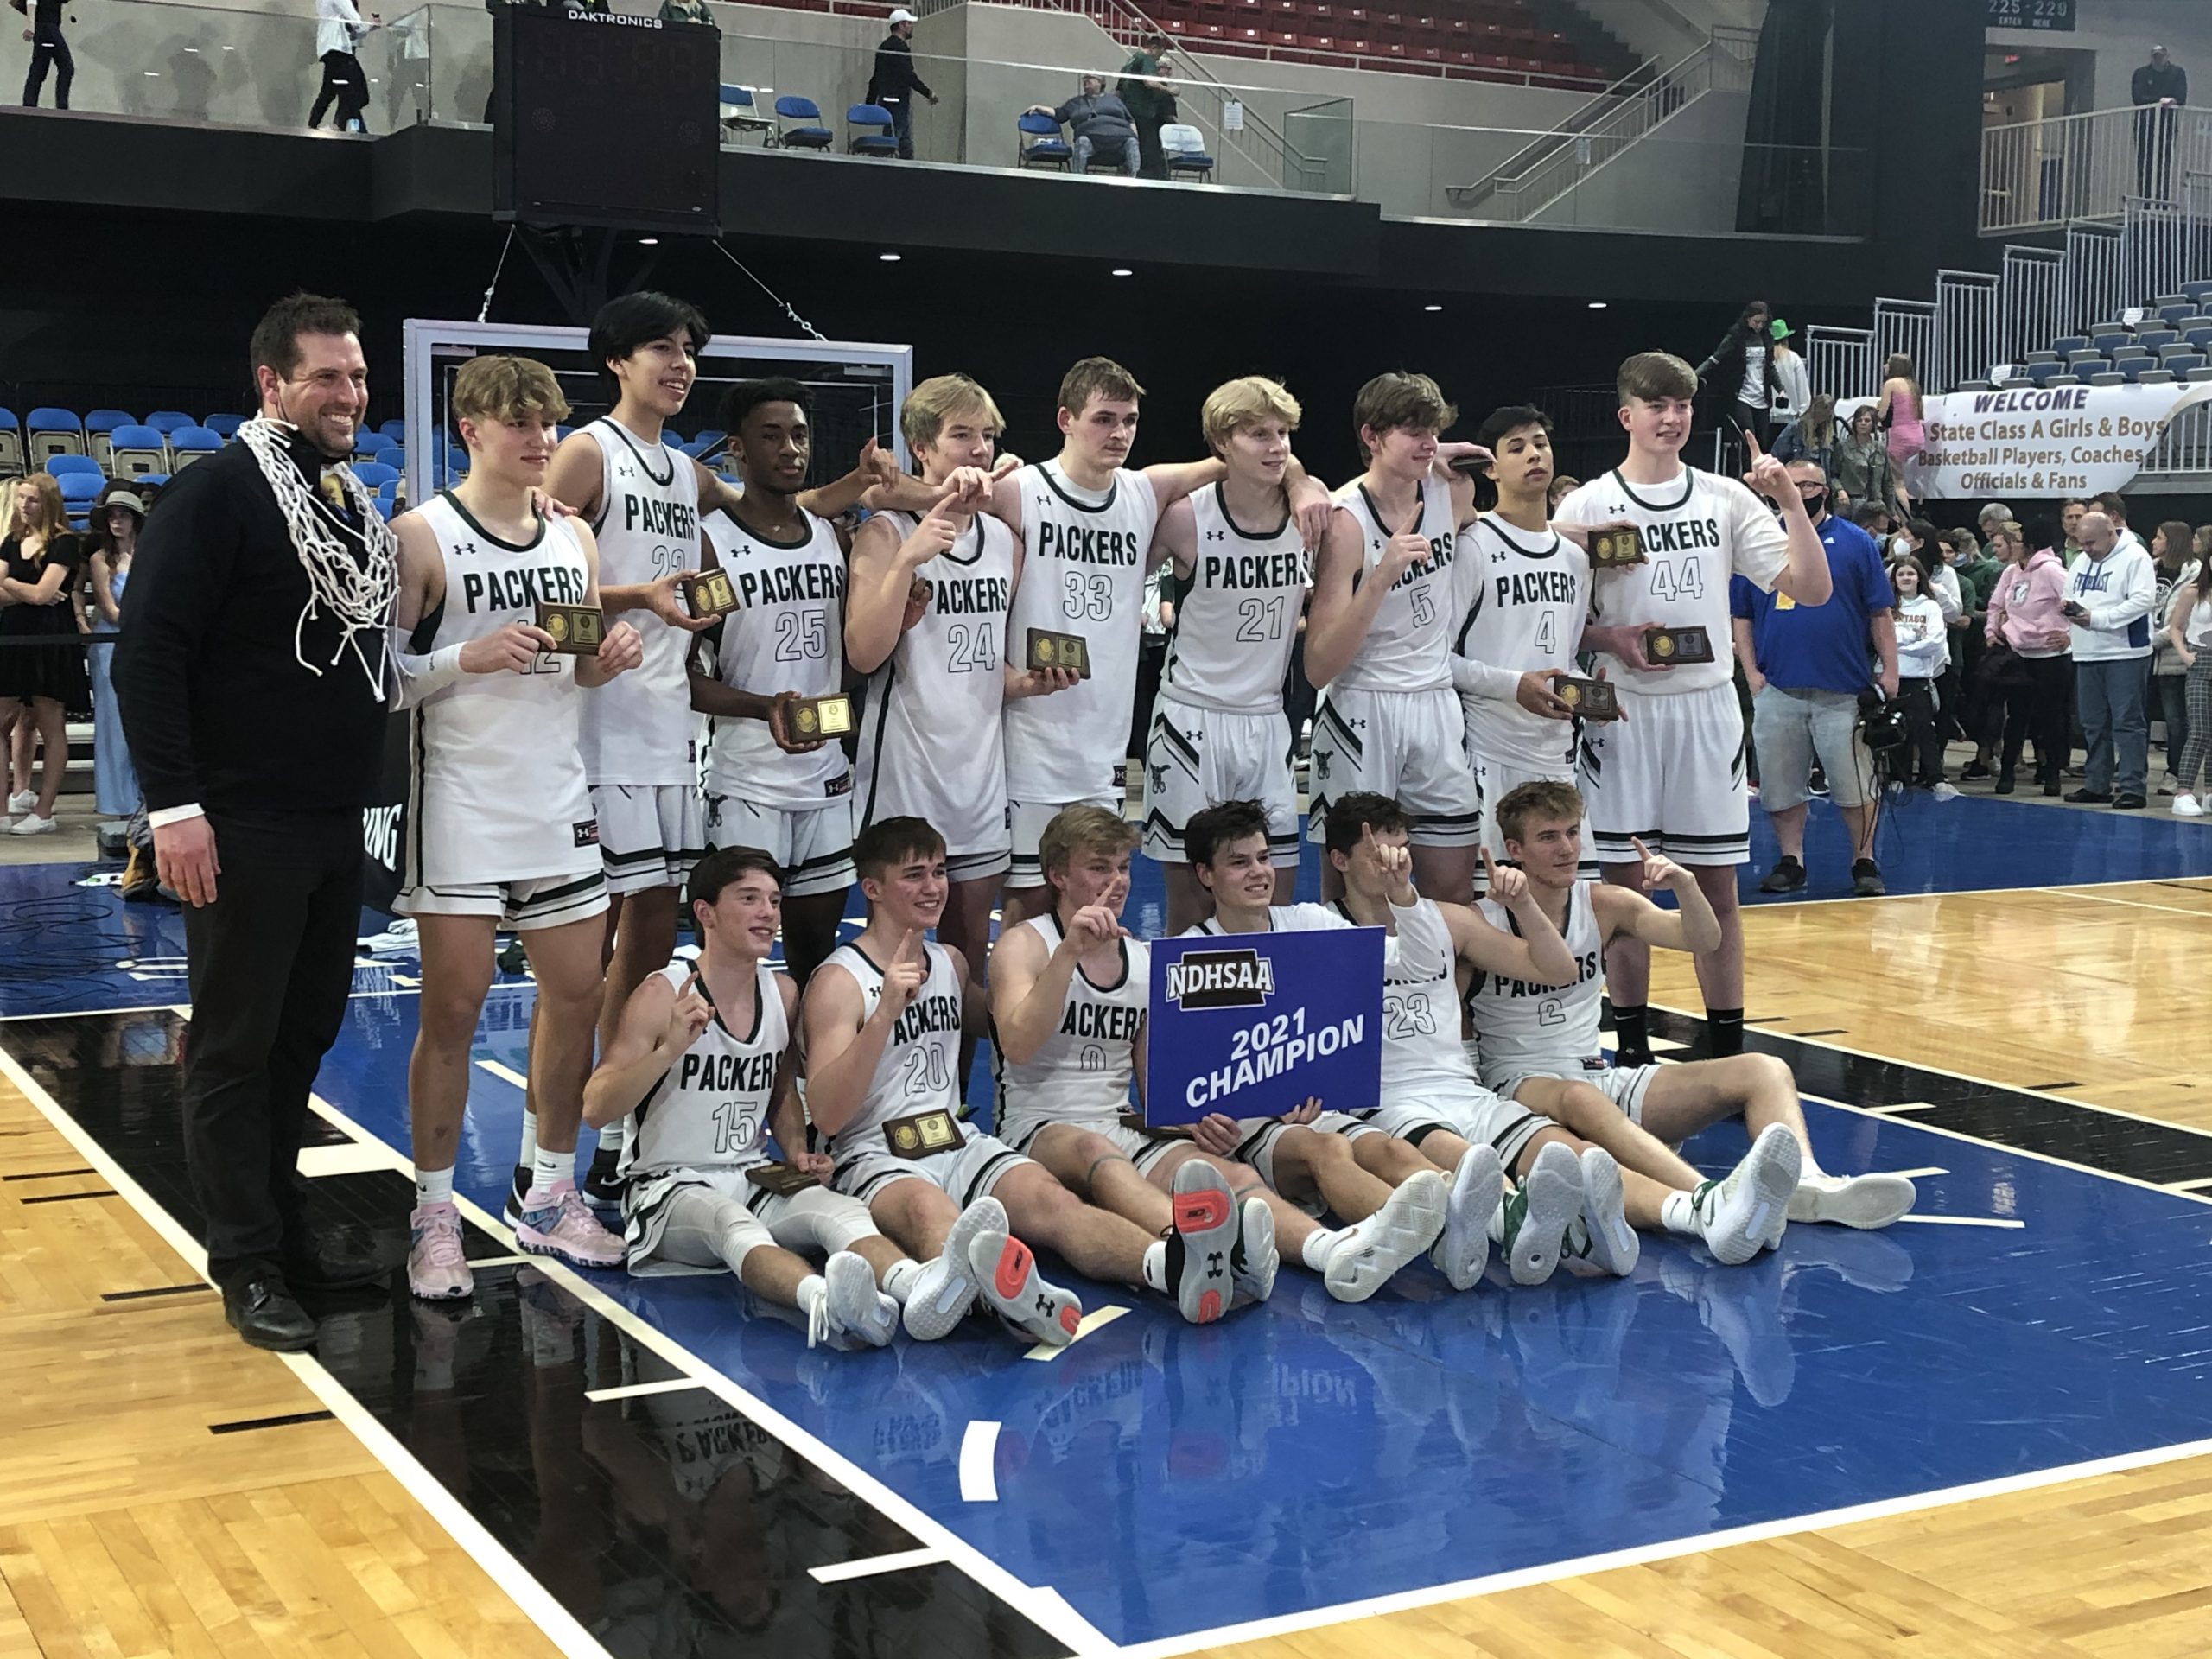 West Fargo ends 29-year title drought, defeats Minot 65-60 in Class A championship